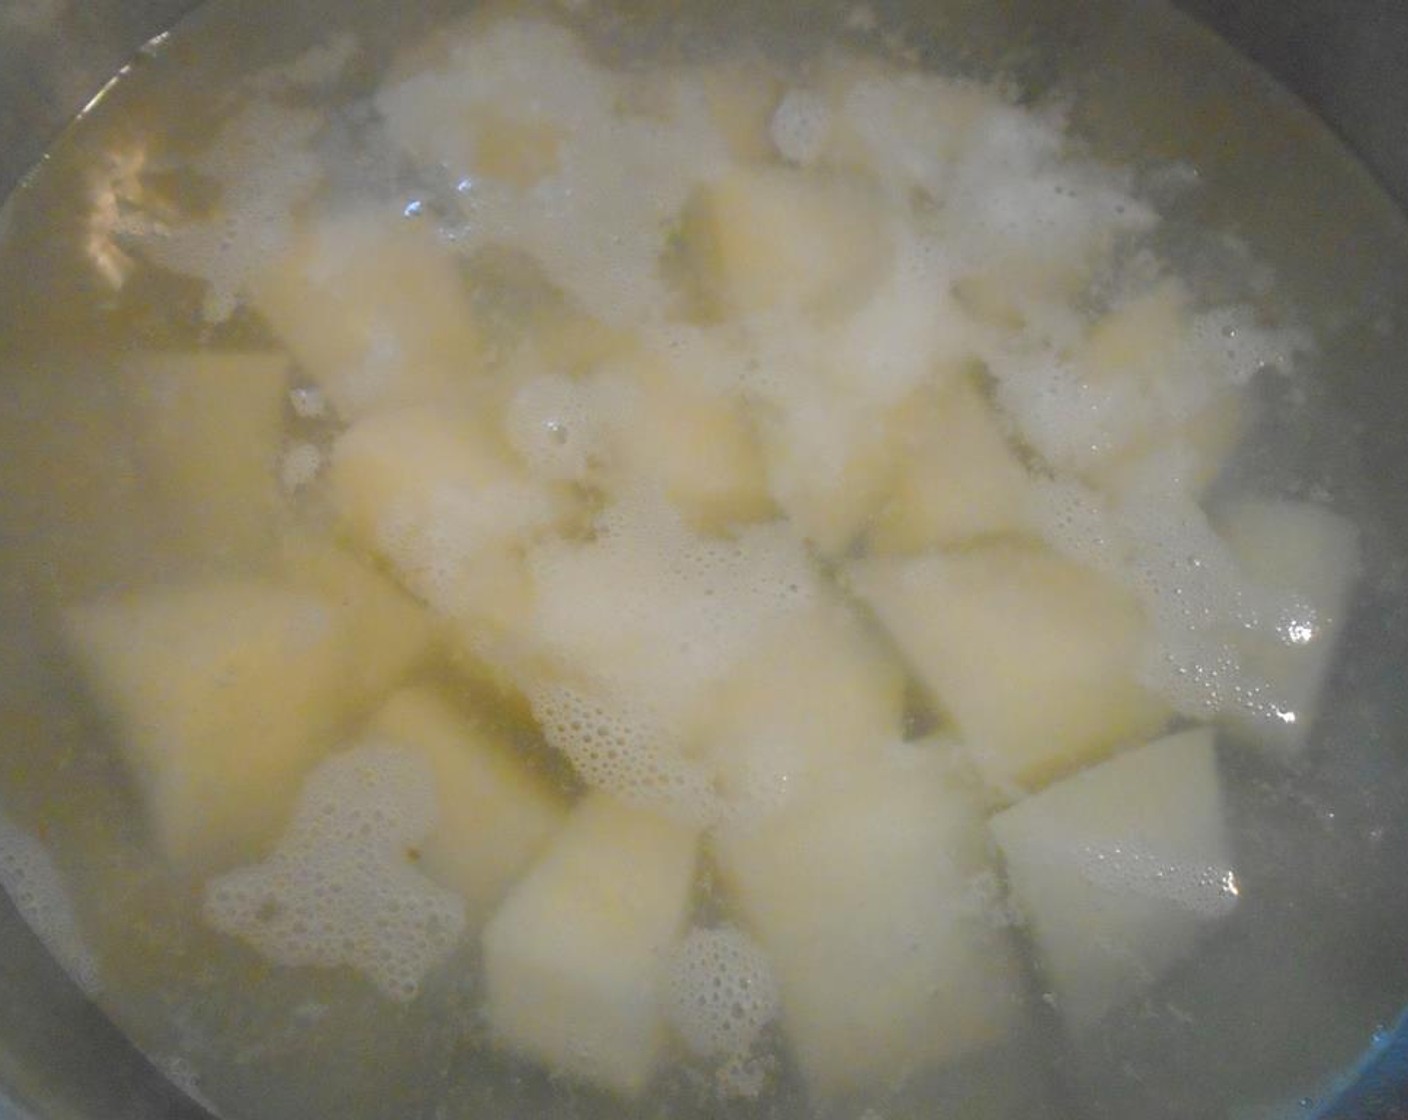 step 1 Peel and dice the Potato (1), then simmer in salted water until soft but not falling apart. Drain and set aside.